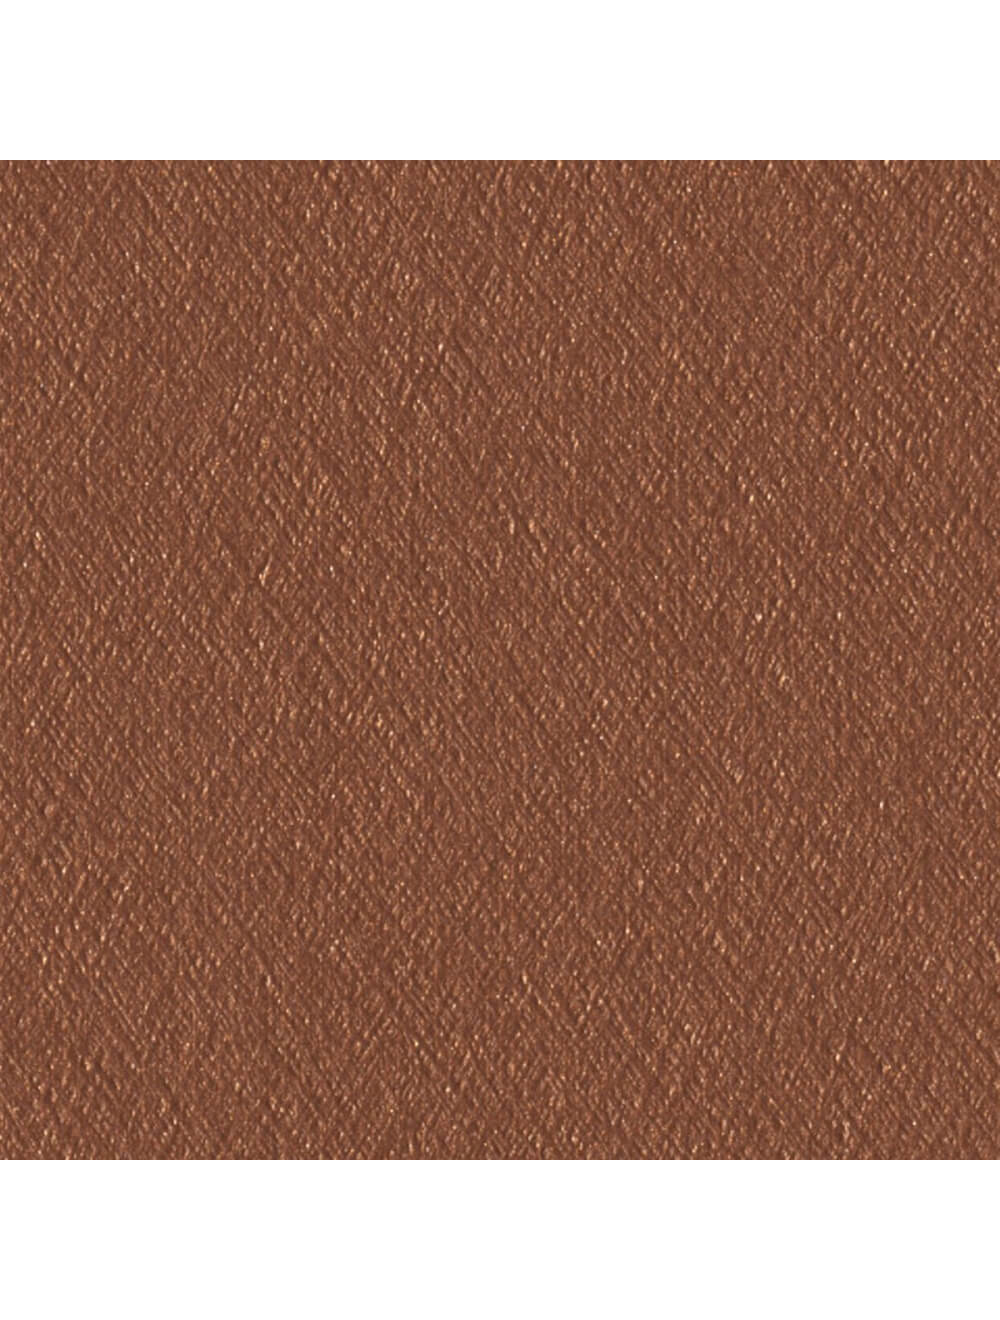 Helsinki Aged Copper Material Swatch